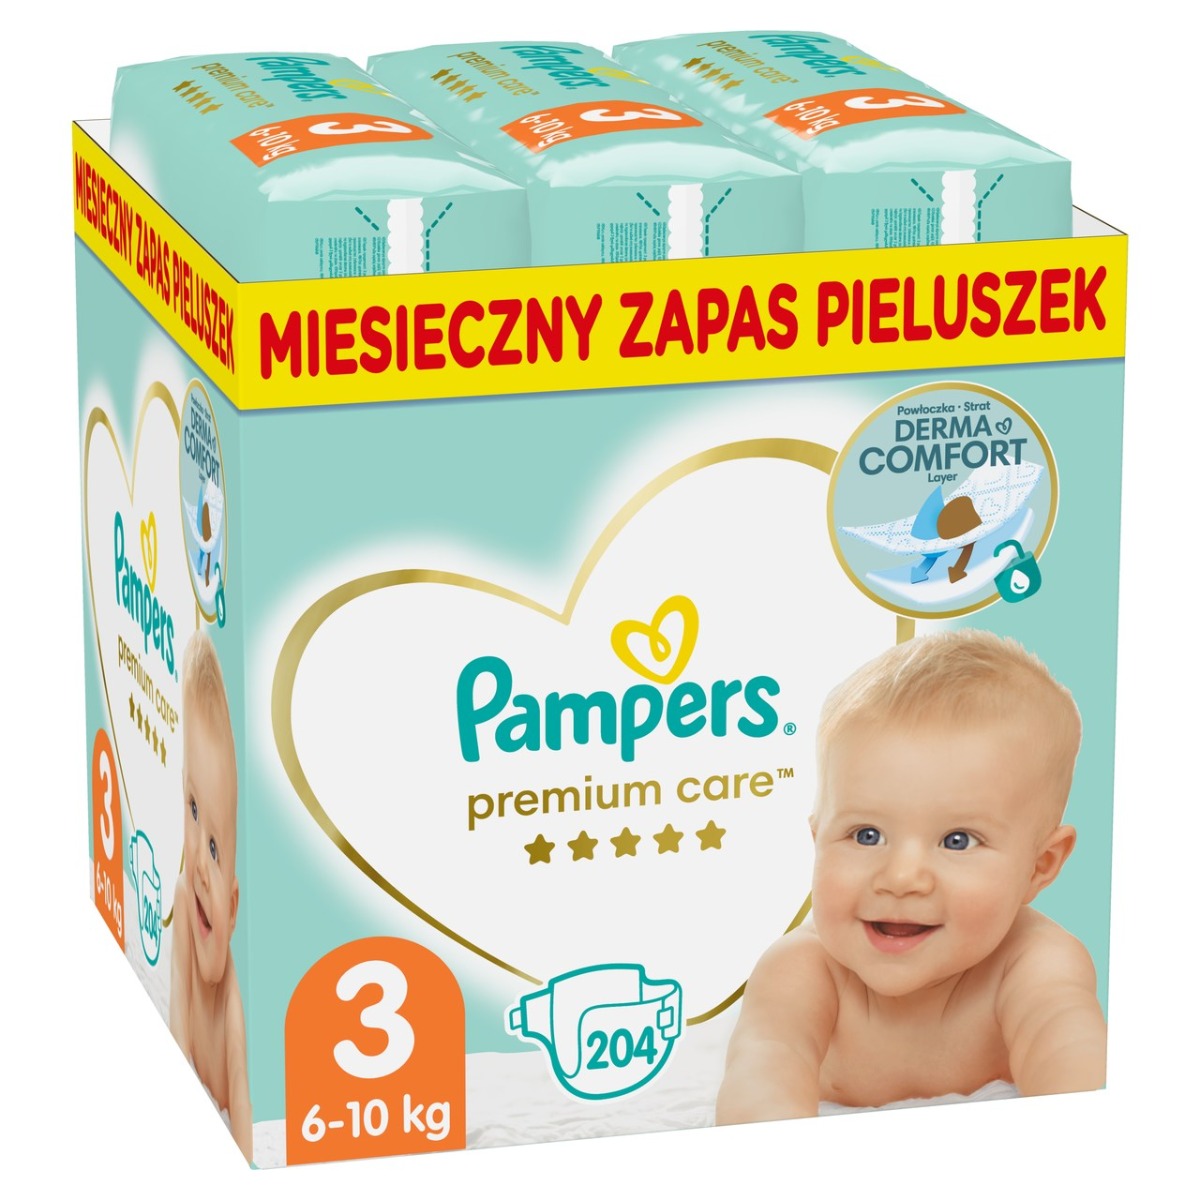 mom son pampers cfnm